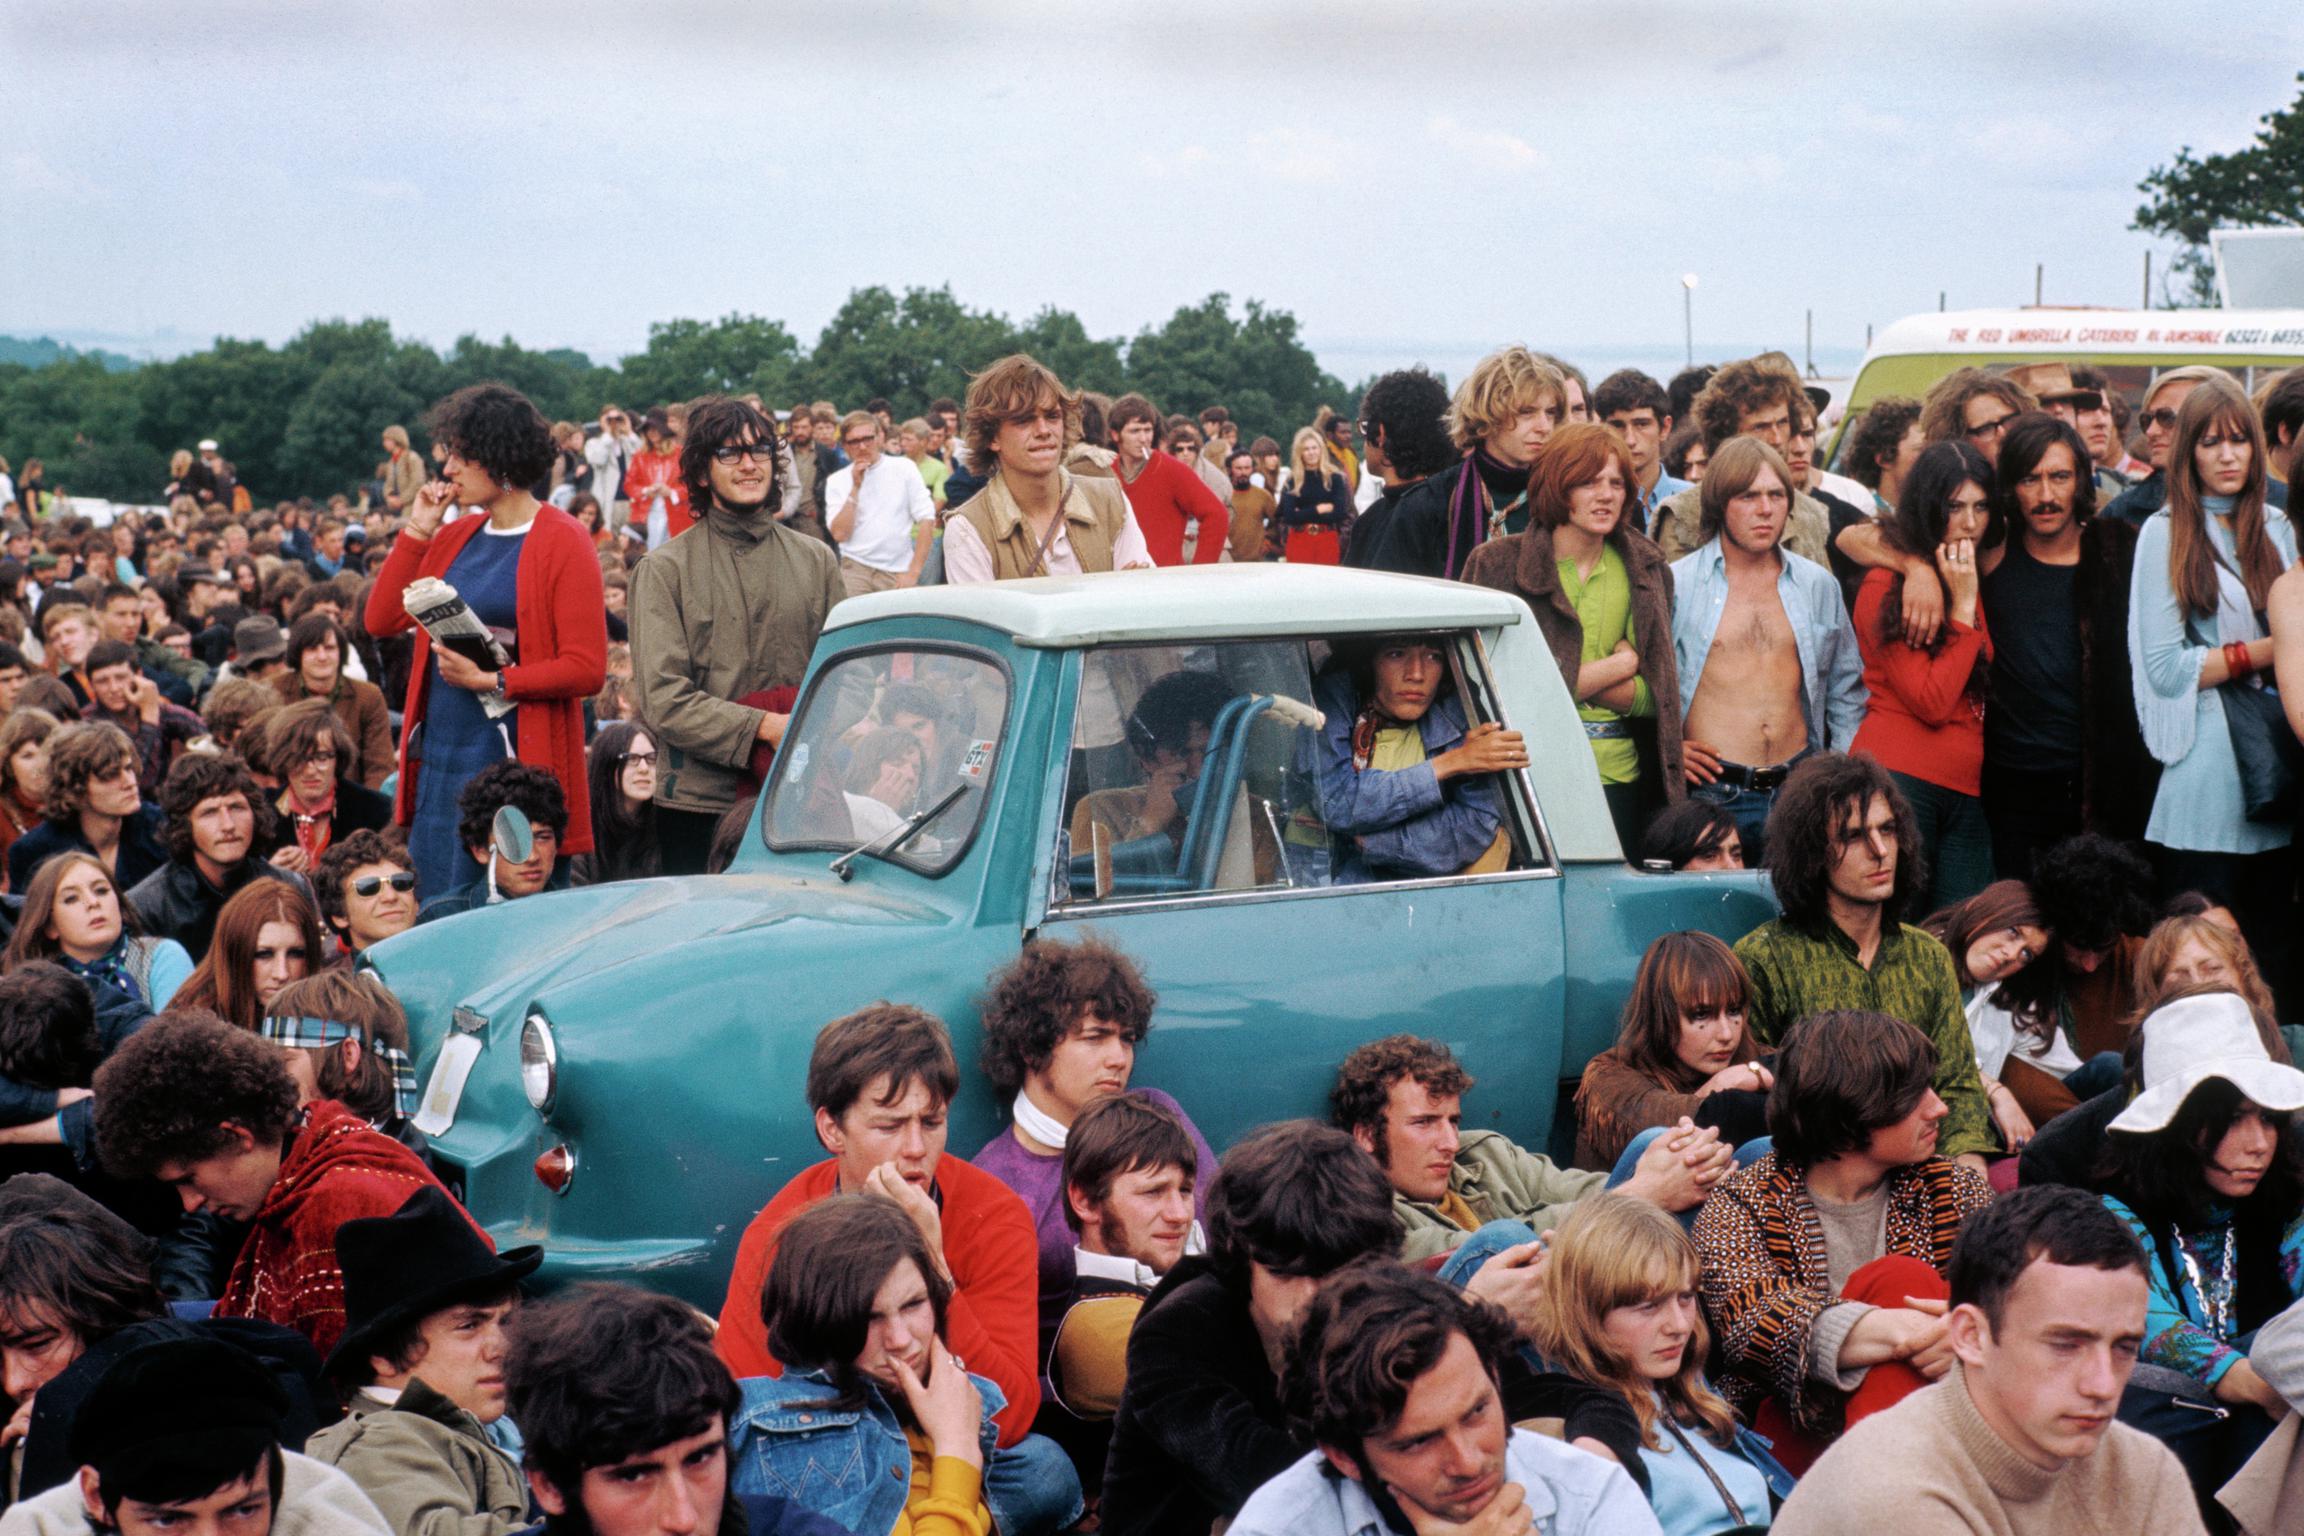 Isle of Wight Festival. It is nice to see that an invalids car is allowed to the front without any complaints from the crowd